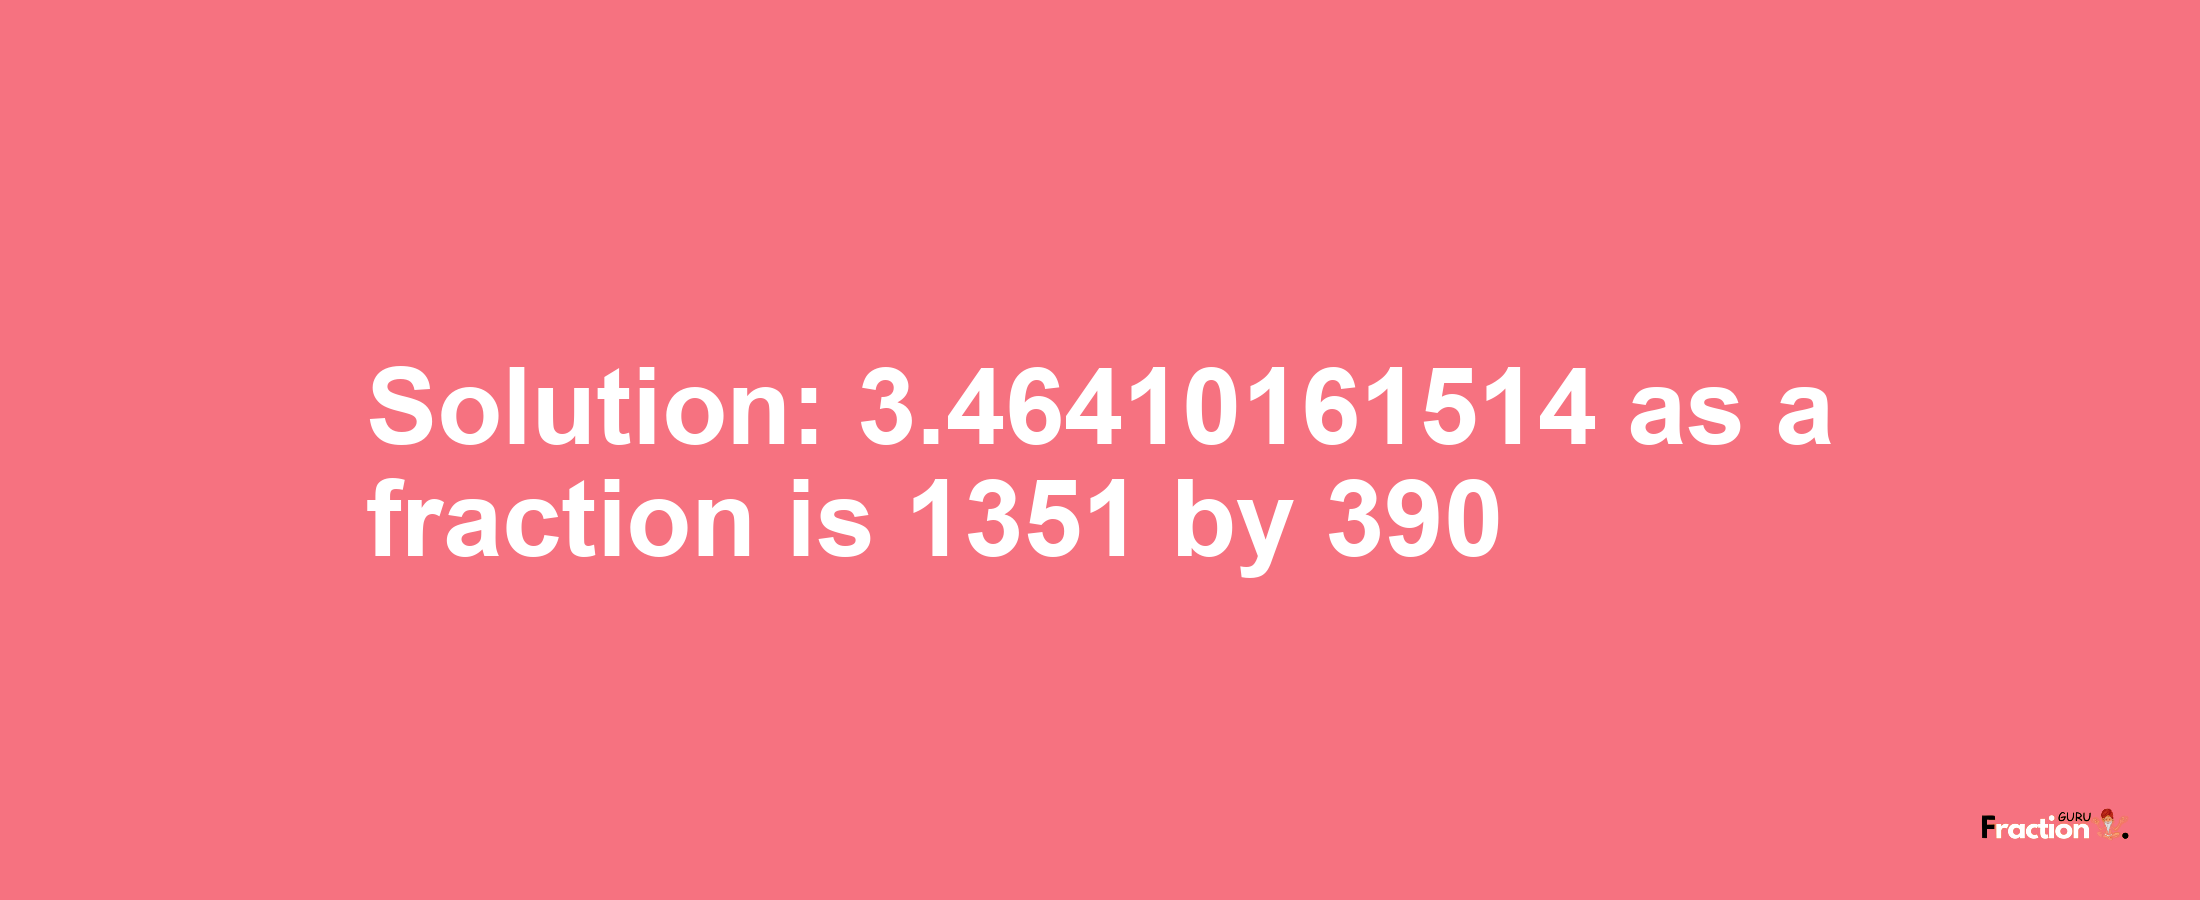 Solution:3.46410161514 as a fraction is 1351/390